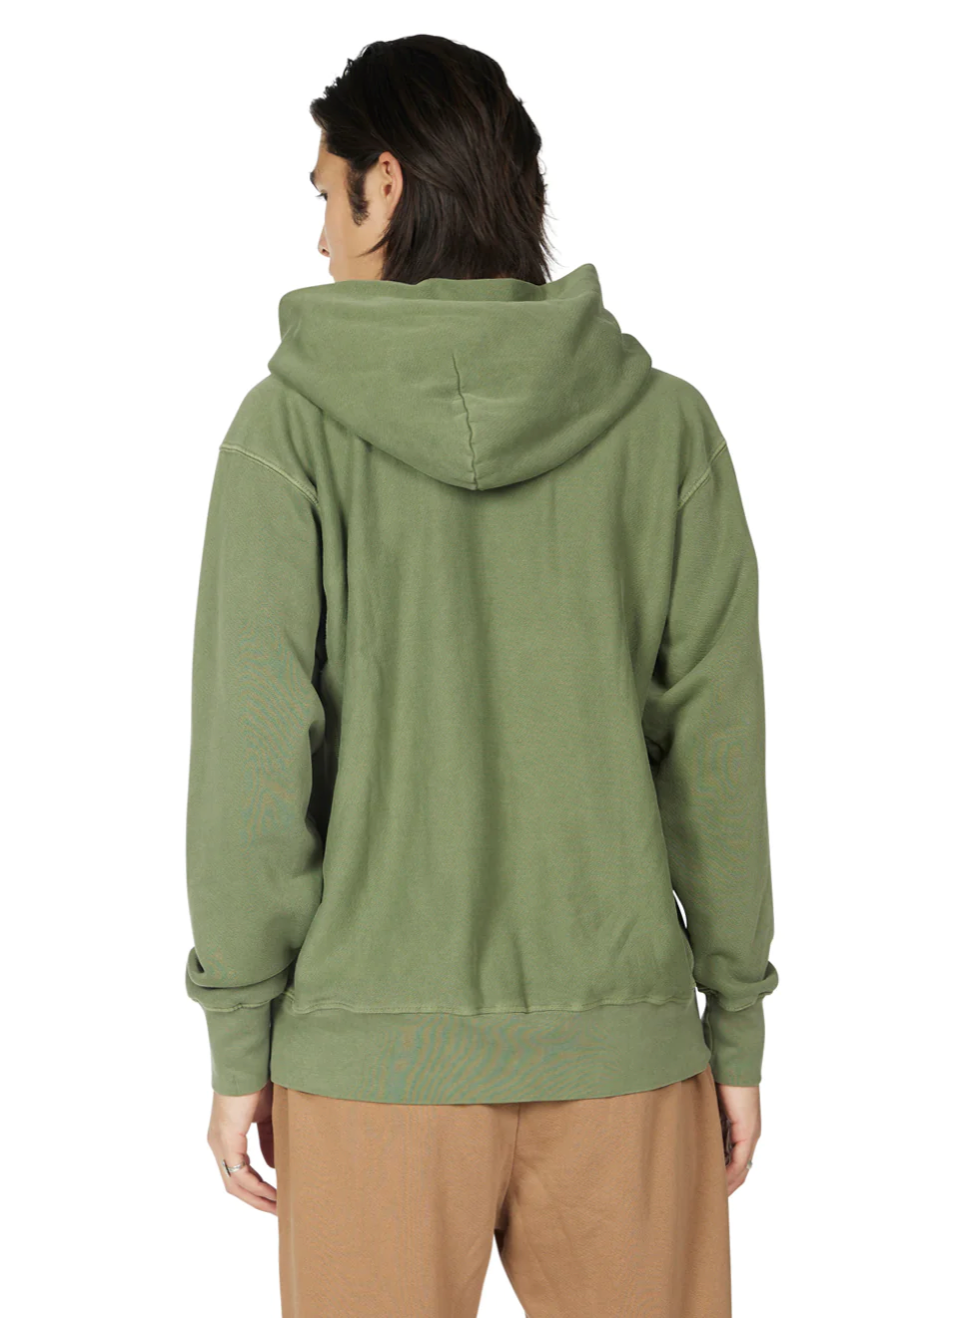 Les Tien Men's Pullover Hoodie (Washed Spruce) - Les Tien Men's Pullover Hoodie (Washed Spruce) - 